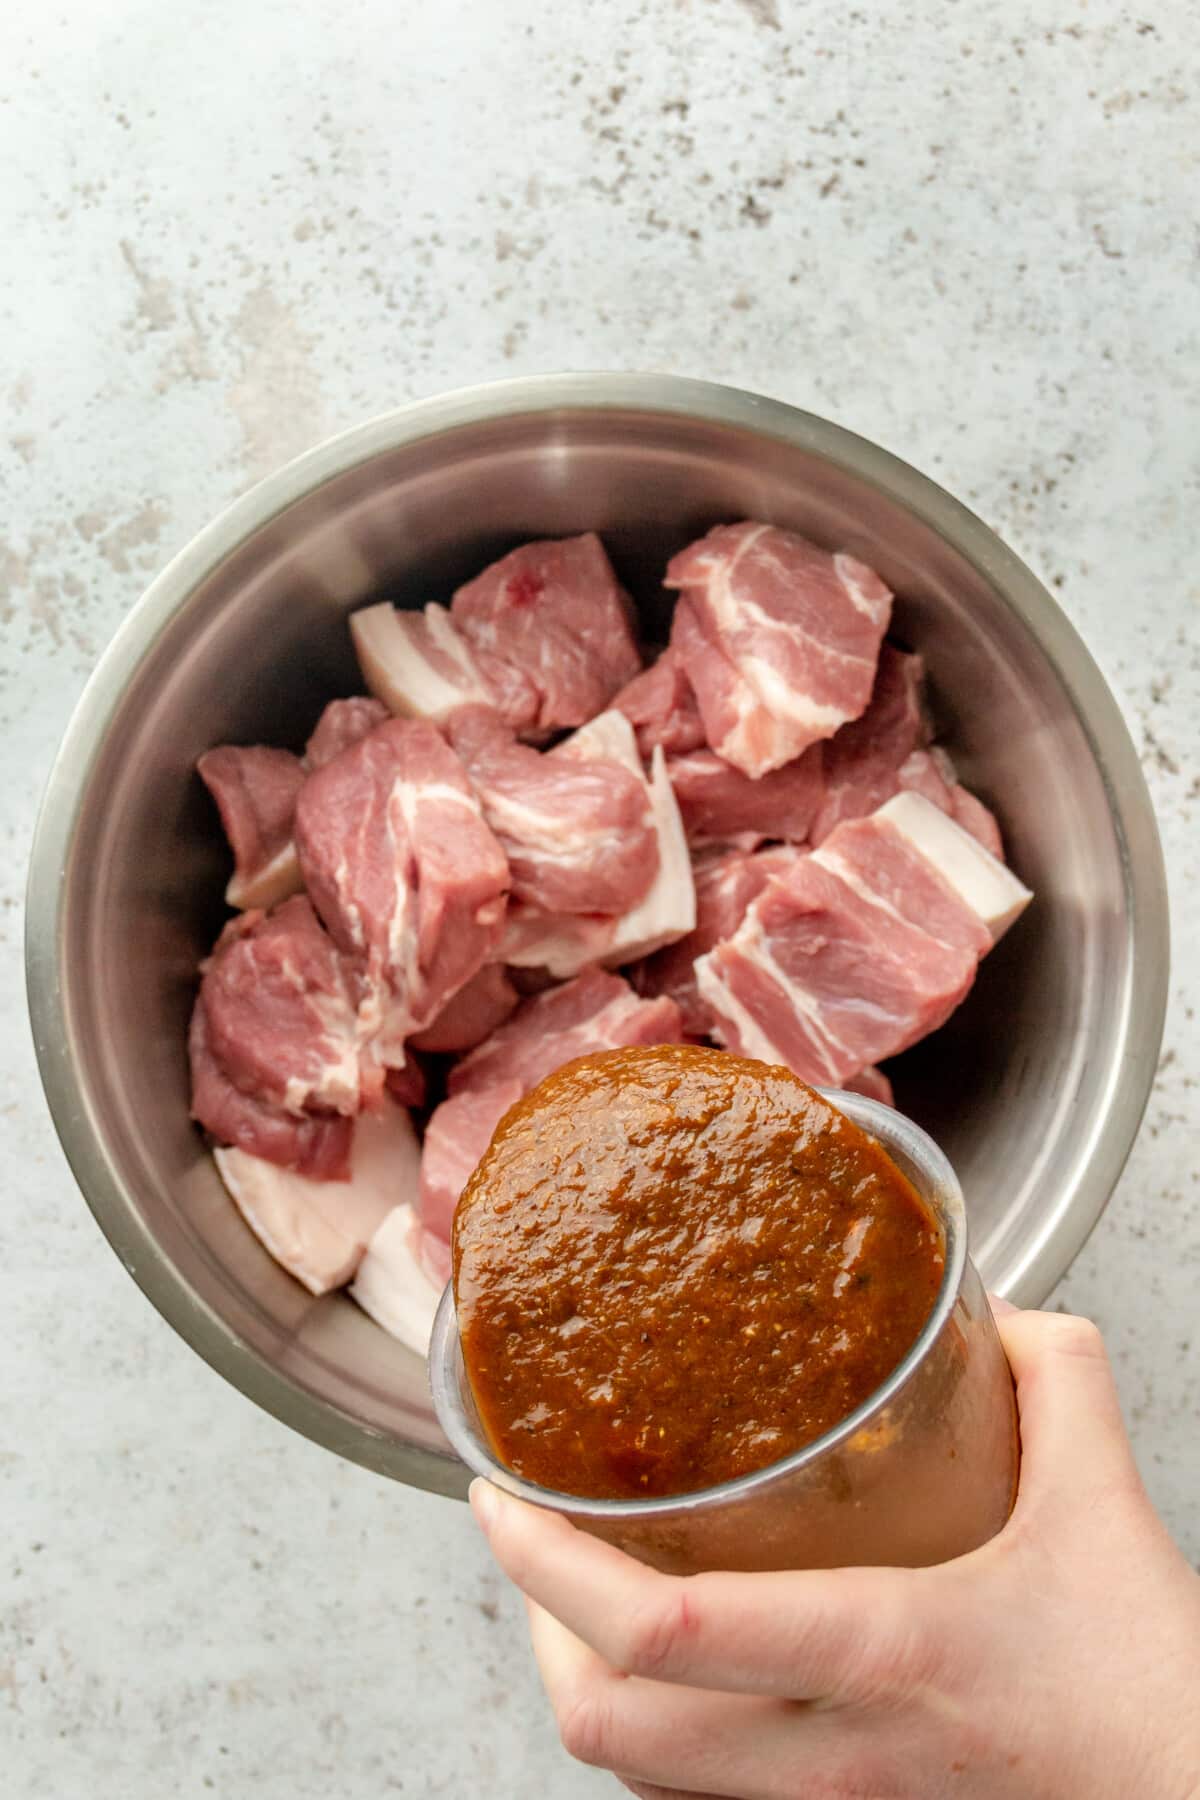 A marinade is poured over chunks of pork shoulder sitting in a stainless steel bowl on a light grey surface.